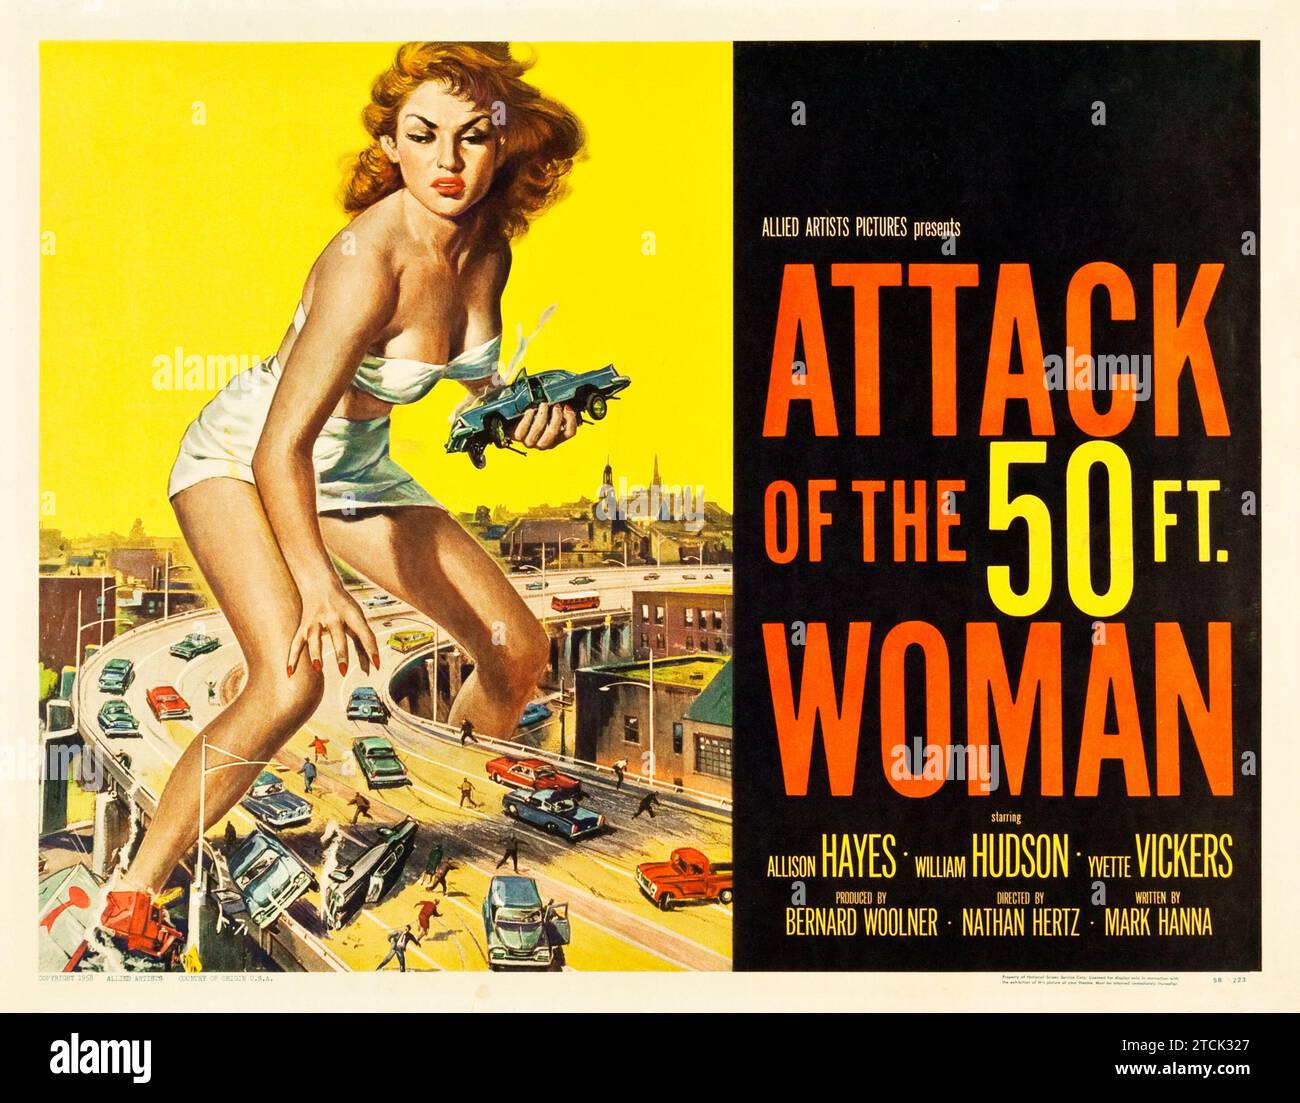 Attack of the 50 Foot Woman (Allied Artists, 1958). Poster di film vintage orizzontali con Allison Hayes, William Hudson e Yvette Vickers. Foto Stock